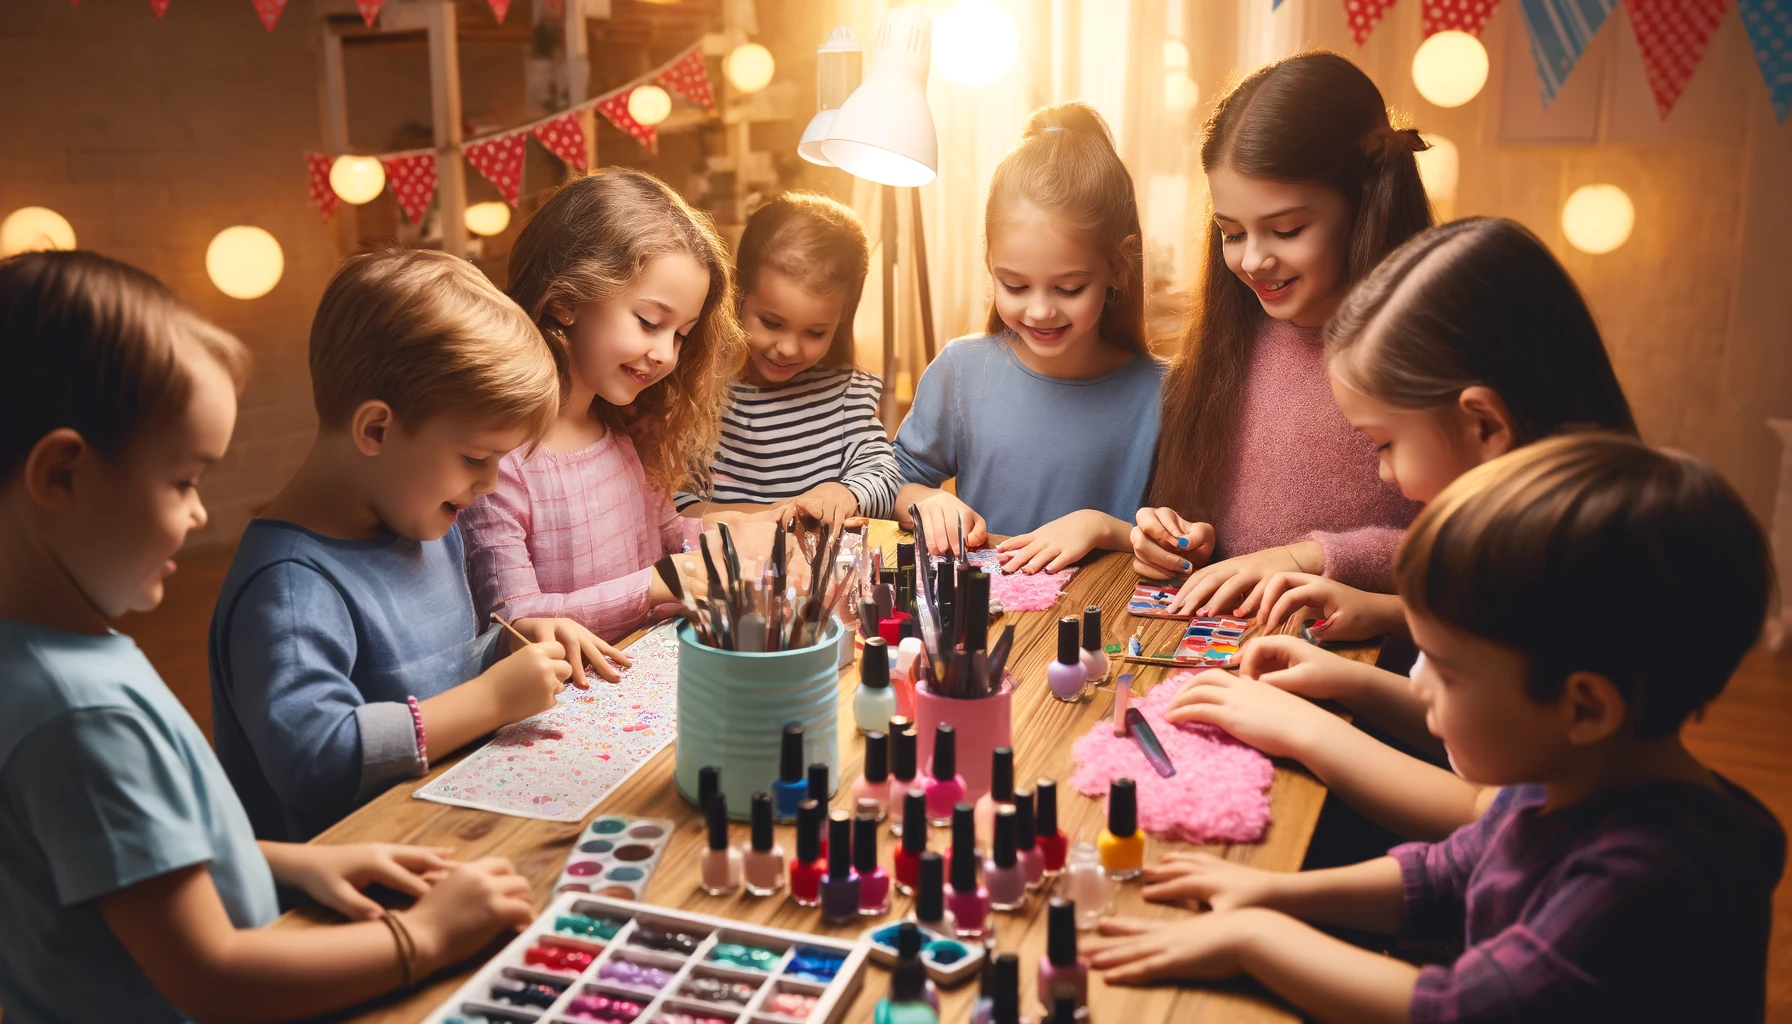 Creative Nail Art Session for Children Nail Art for Kids: 10 Safe and Fun Designs for Little Hands - 7 Pouted Lifestyle Magazine